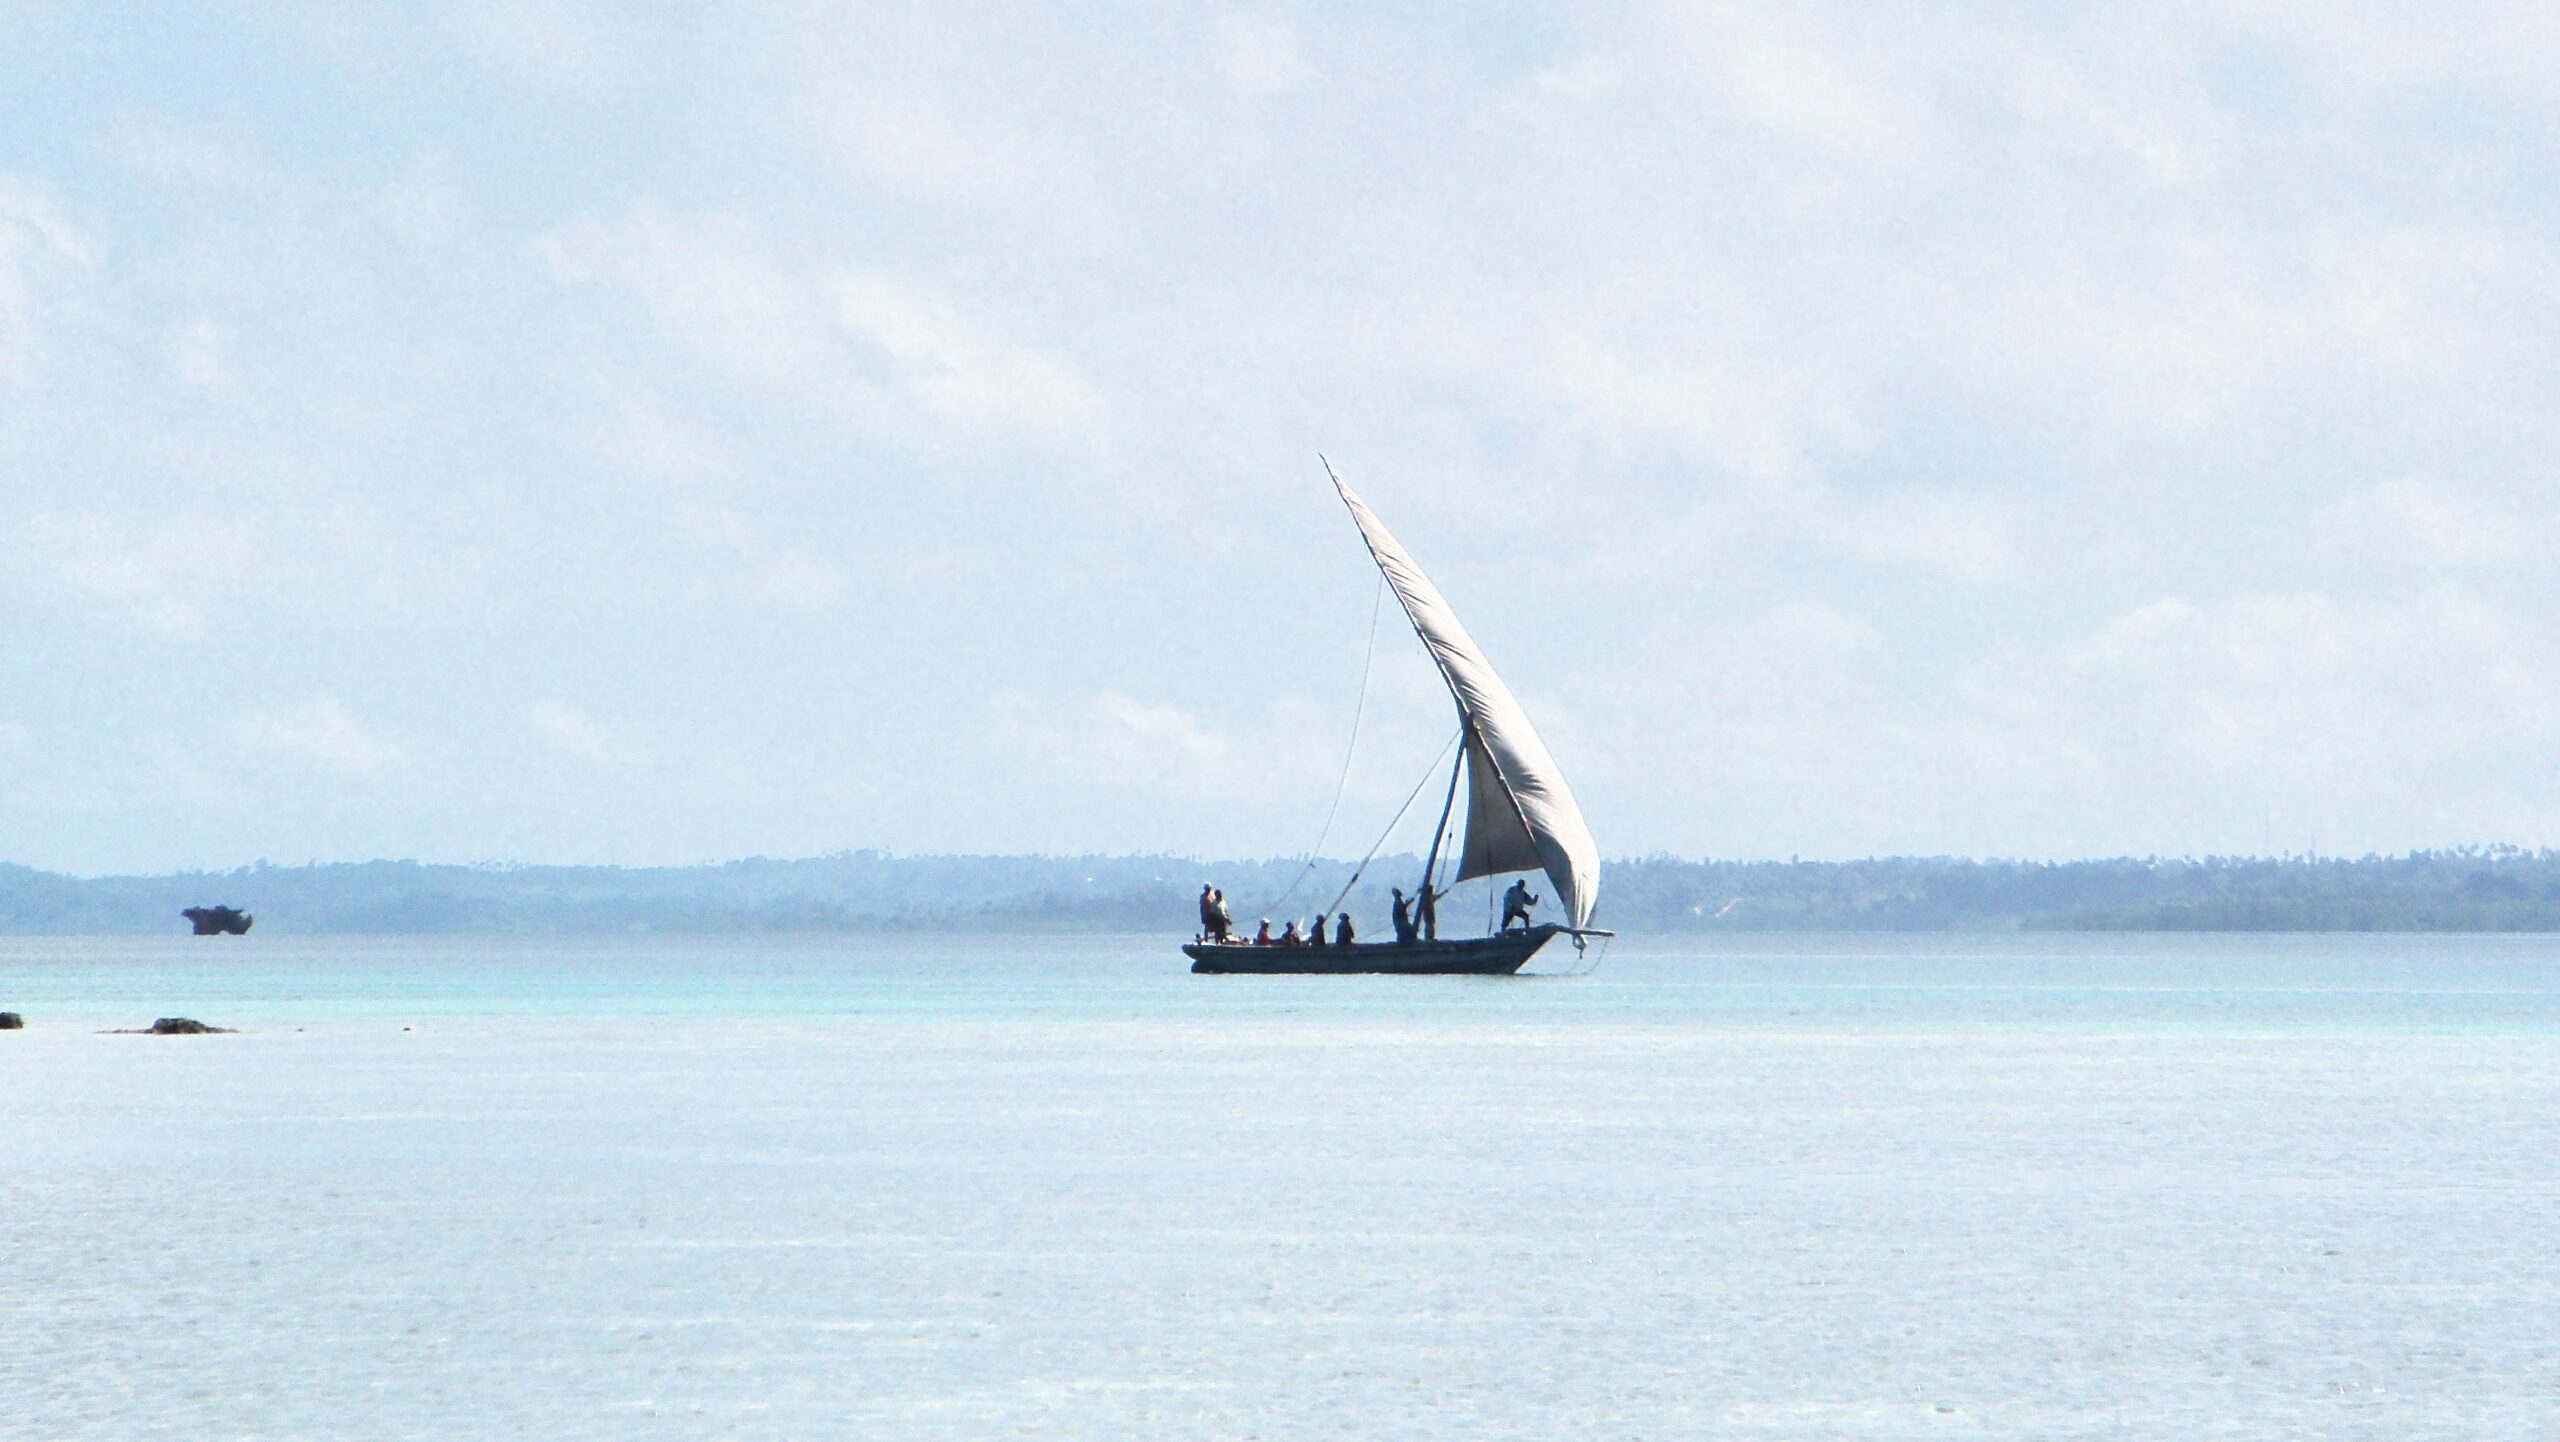 Fishermen on traditional dhow sailboat off the coast of Pemba, Tanzania